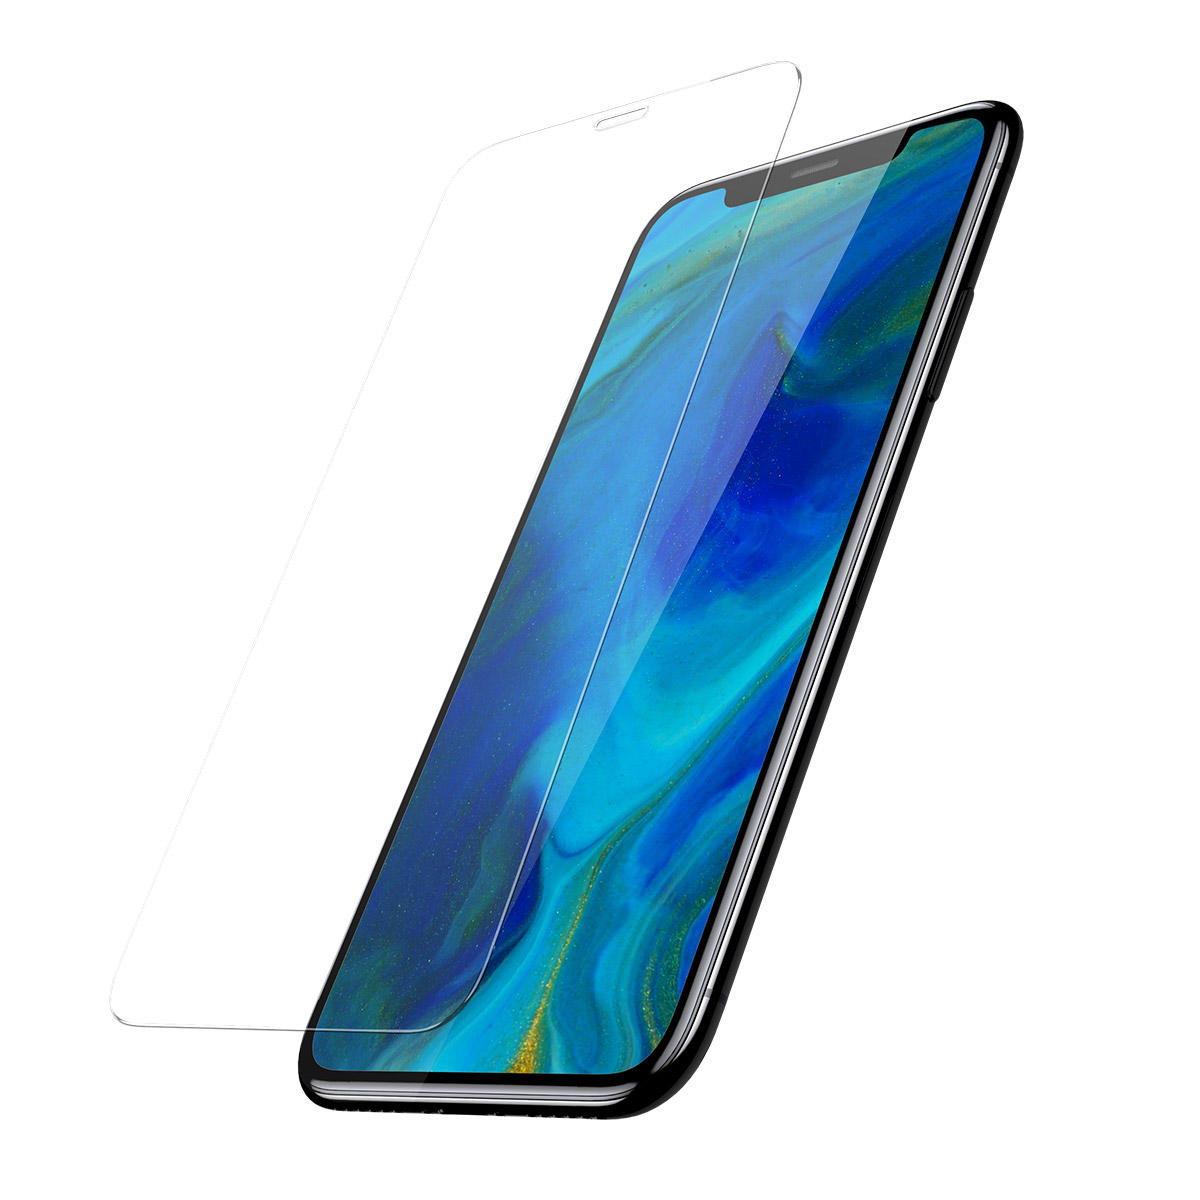 Baseus Upgrade Full Glass Screen Protector For iPhone XR 0.15mm Scratch Resistant Tempered Glass Film COD